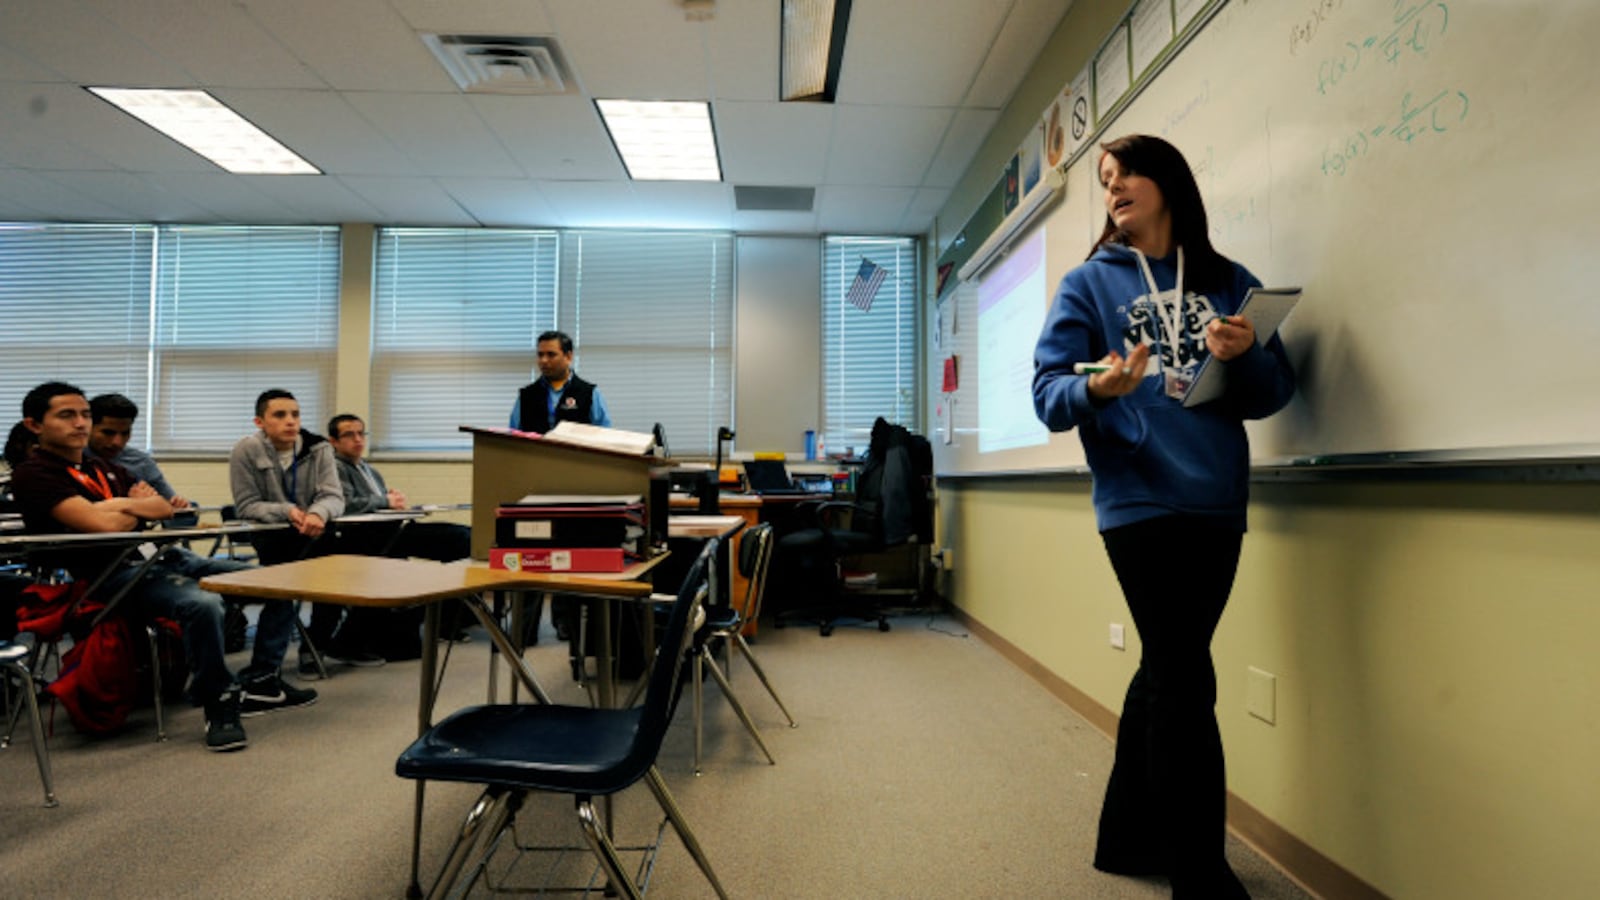 Hinkley High School student Catherine Gibson turns toward her college algebra class to explain a problem she works on the board in 2013 at Hinkley High School in Aurora, Colo. (Photo by Jamie Cotten, Special to The Denver Post)